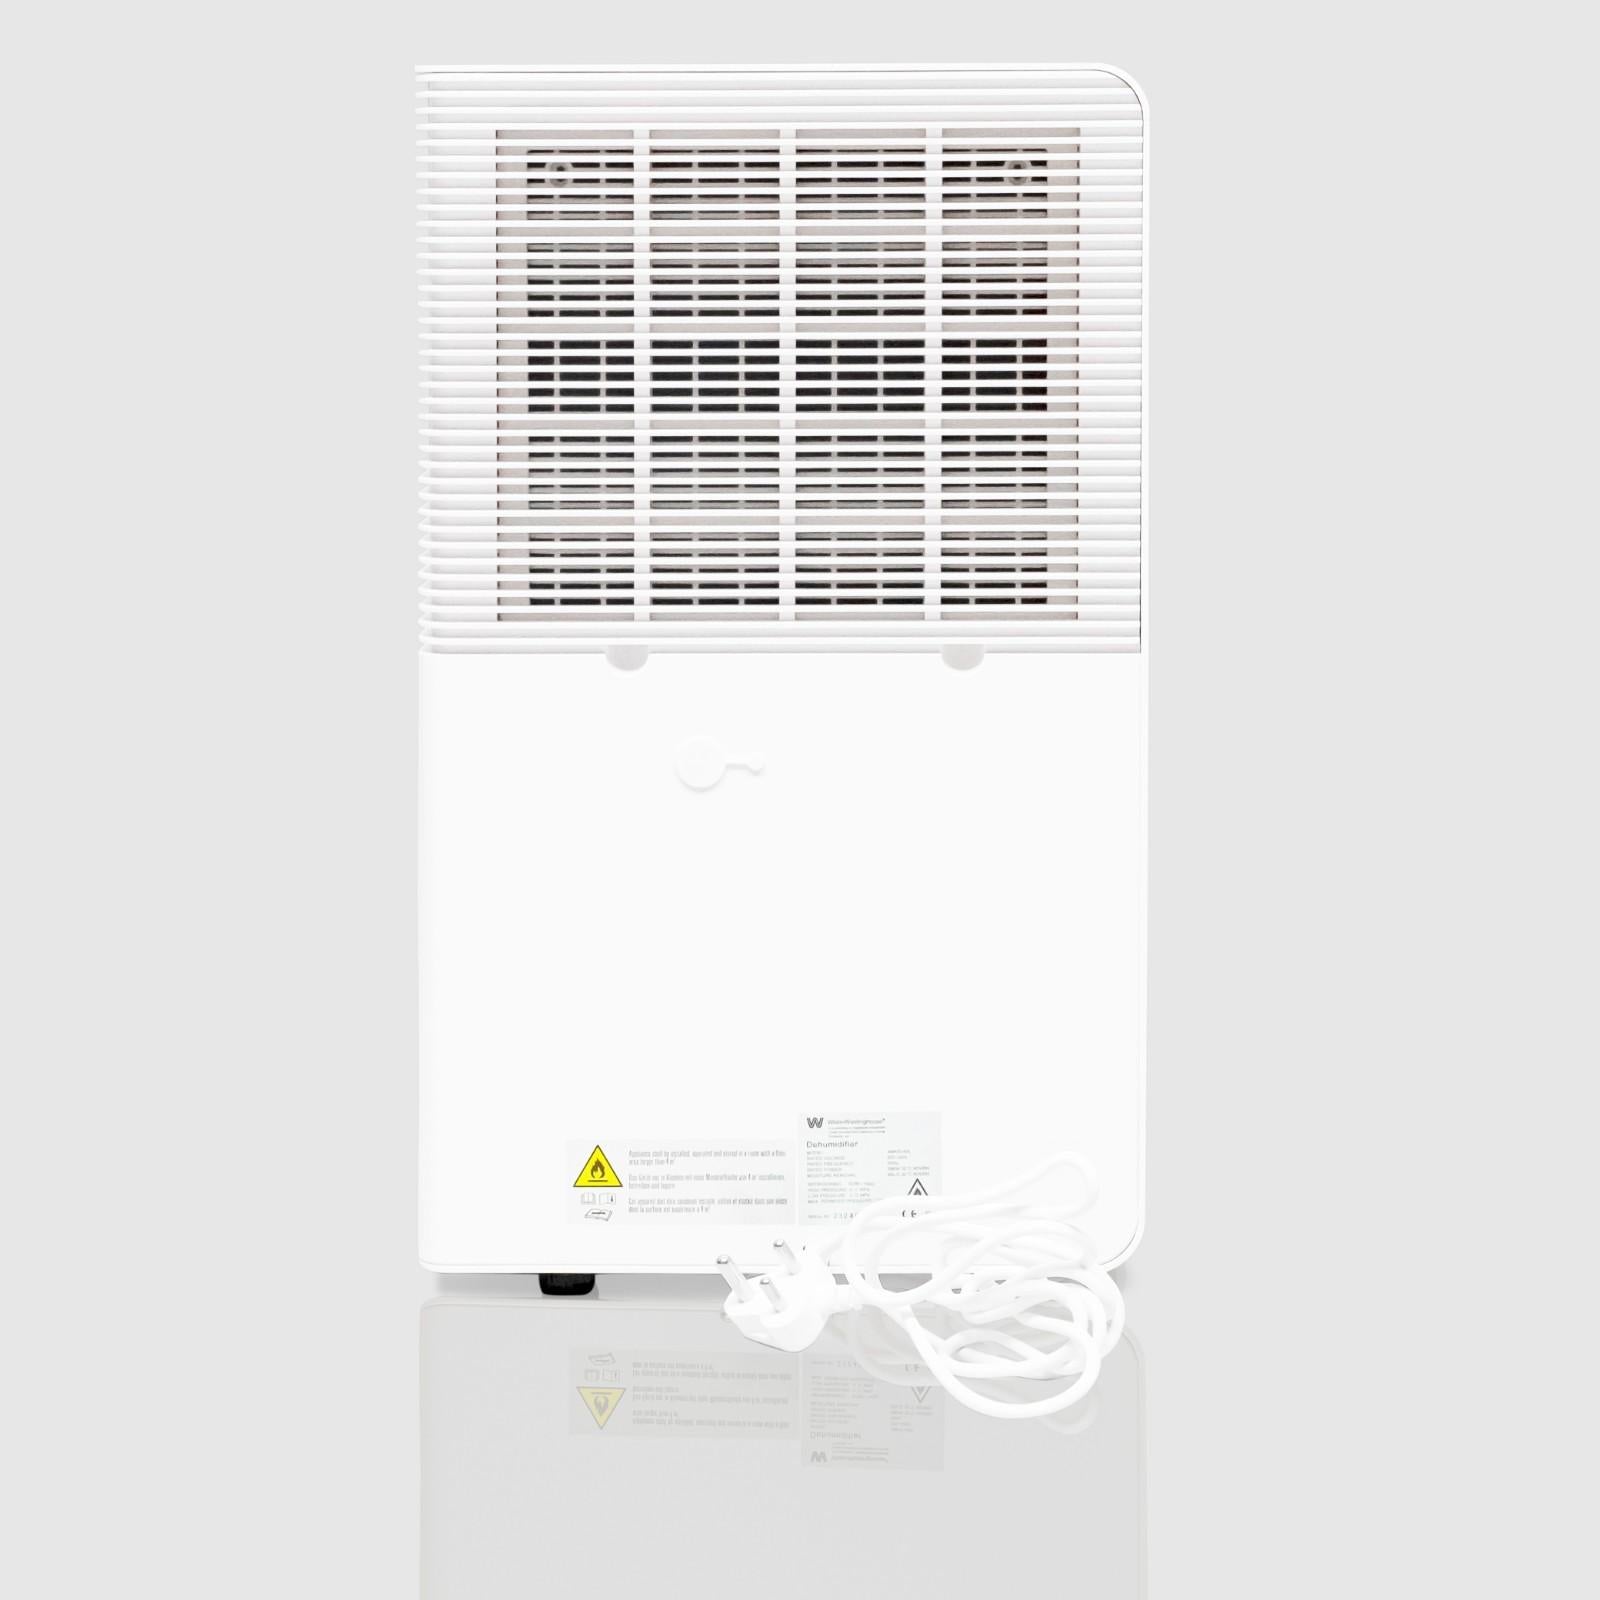 Rear view of the White Westinghouse Dehumidifier AWHD40, showcasing the back air vent and the power cord. The sleek white design includes safety labels, making it suitable for maintaining optimal humidity levels in residential and commercial spaces.